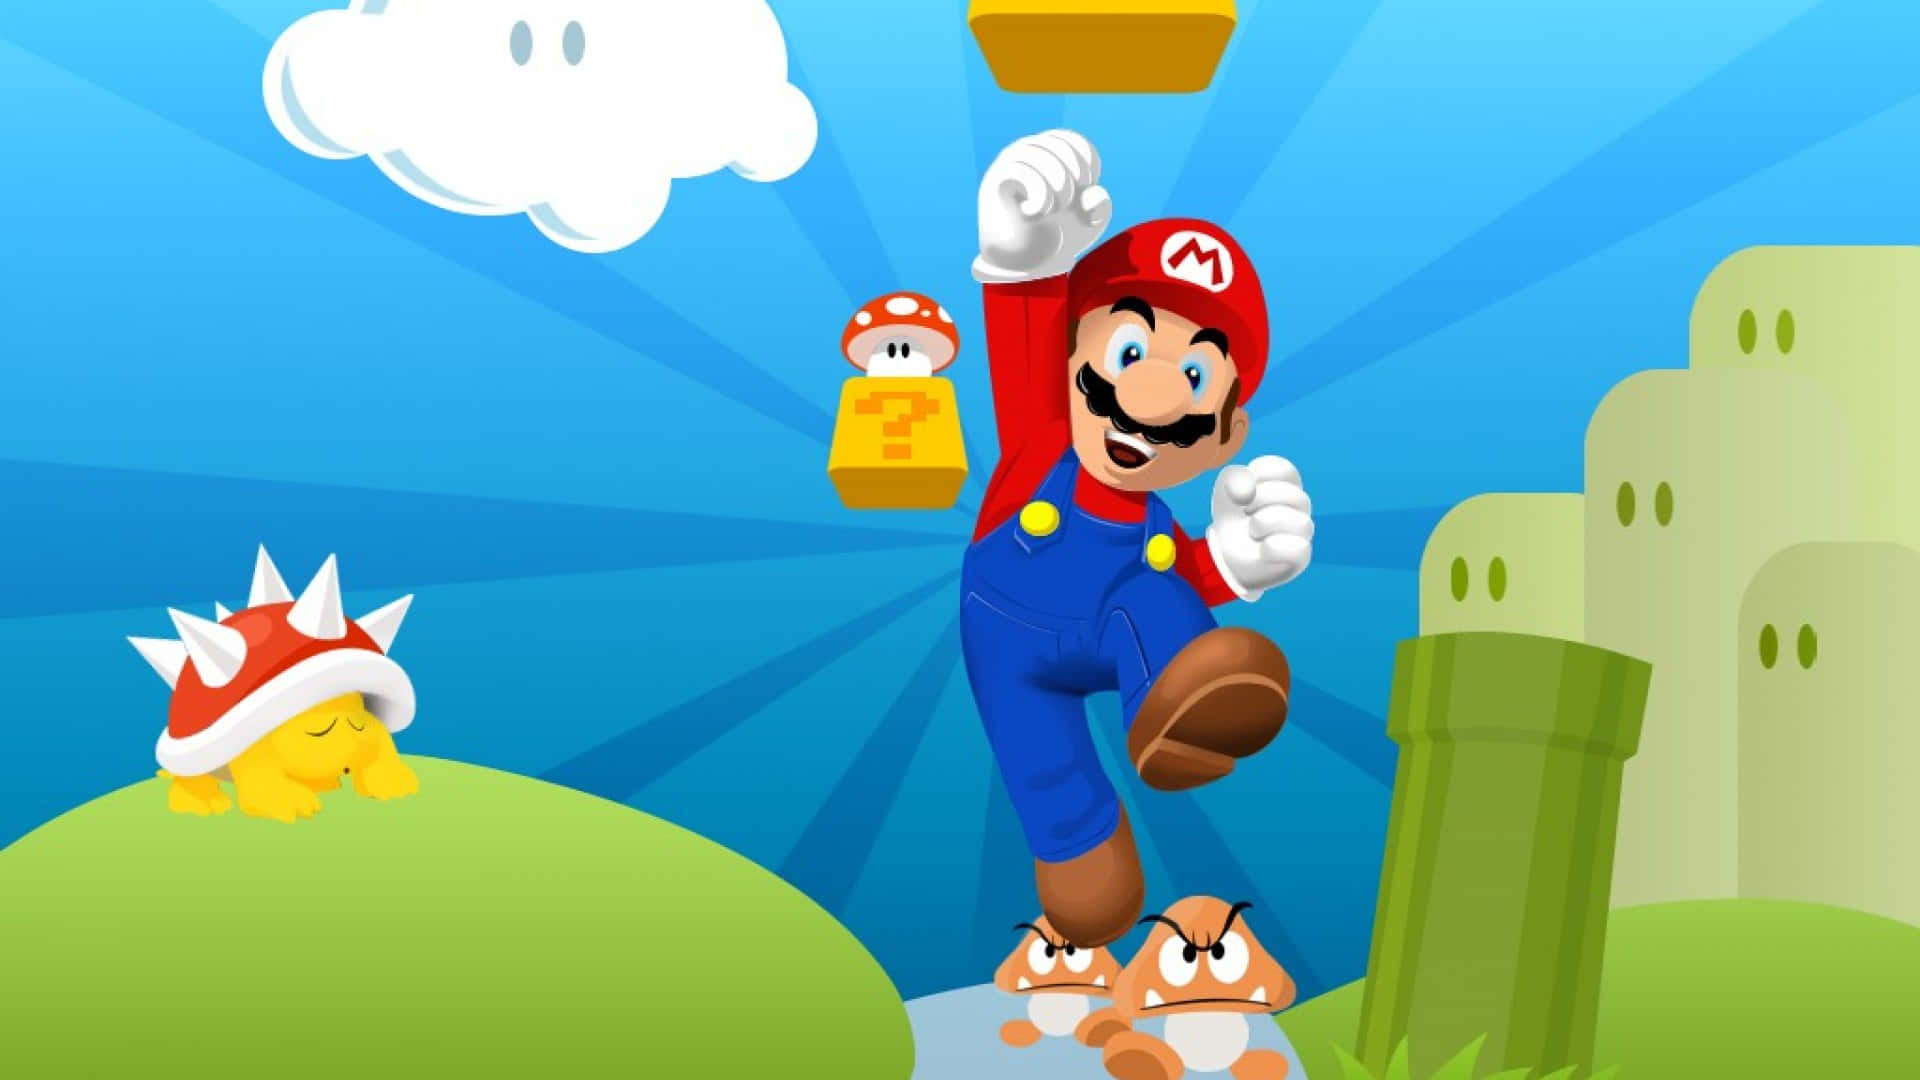 Cool Mario strikes a pose in this iconic video game scene. Wallpaper